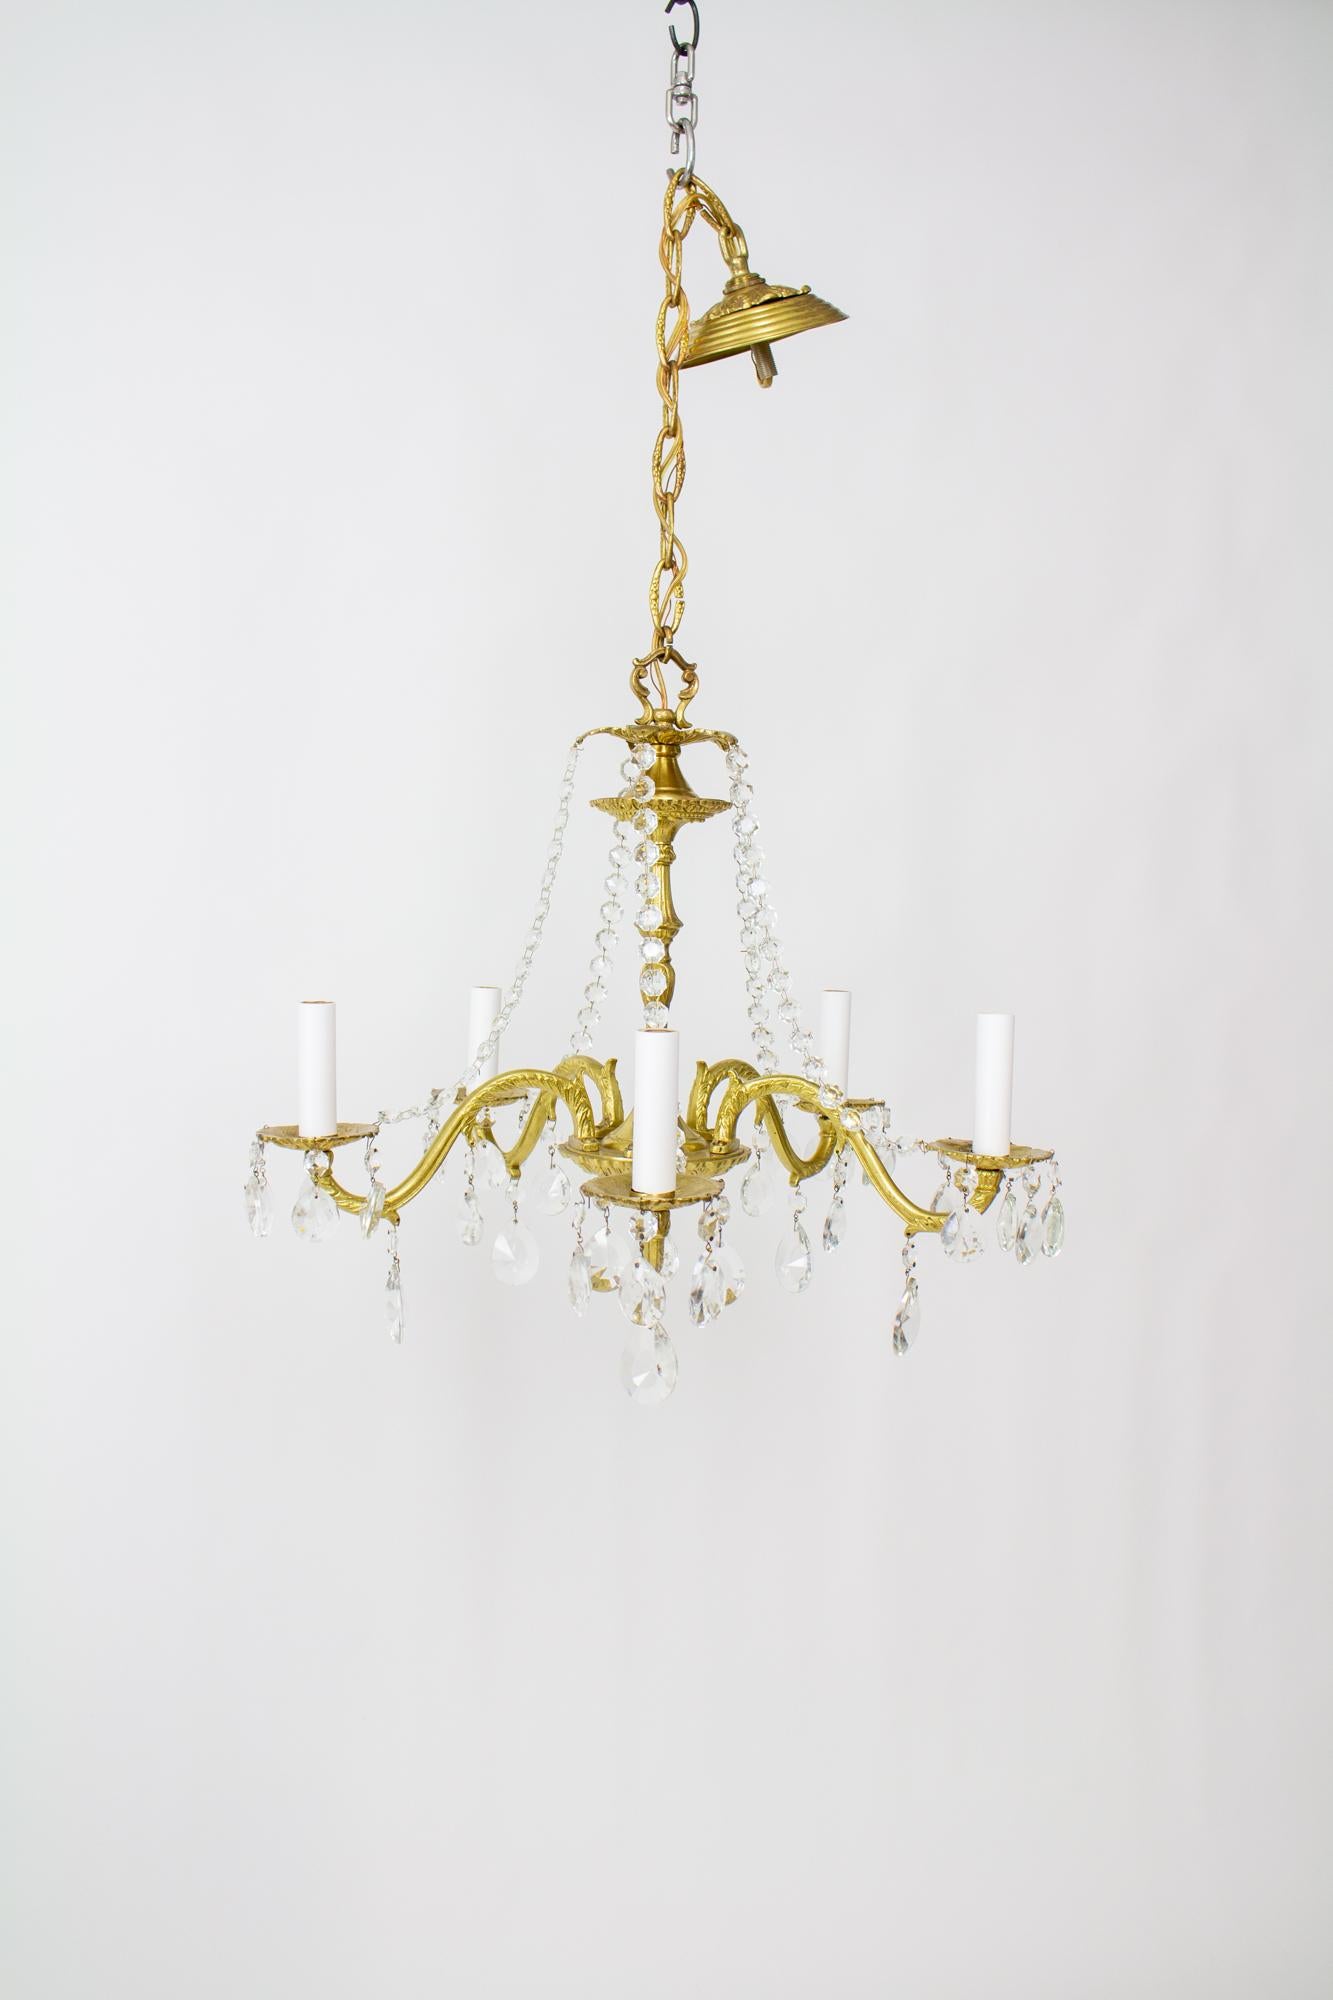 Mid-20th Century Five Arm Spanish Cast Brass and Crystal Chandelier For Sale 2